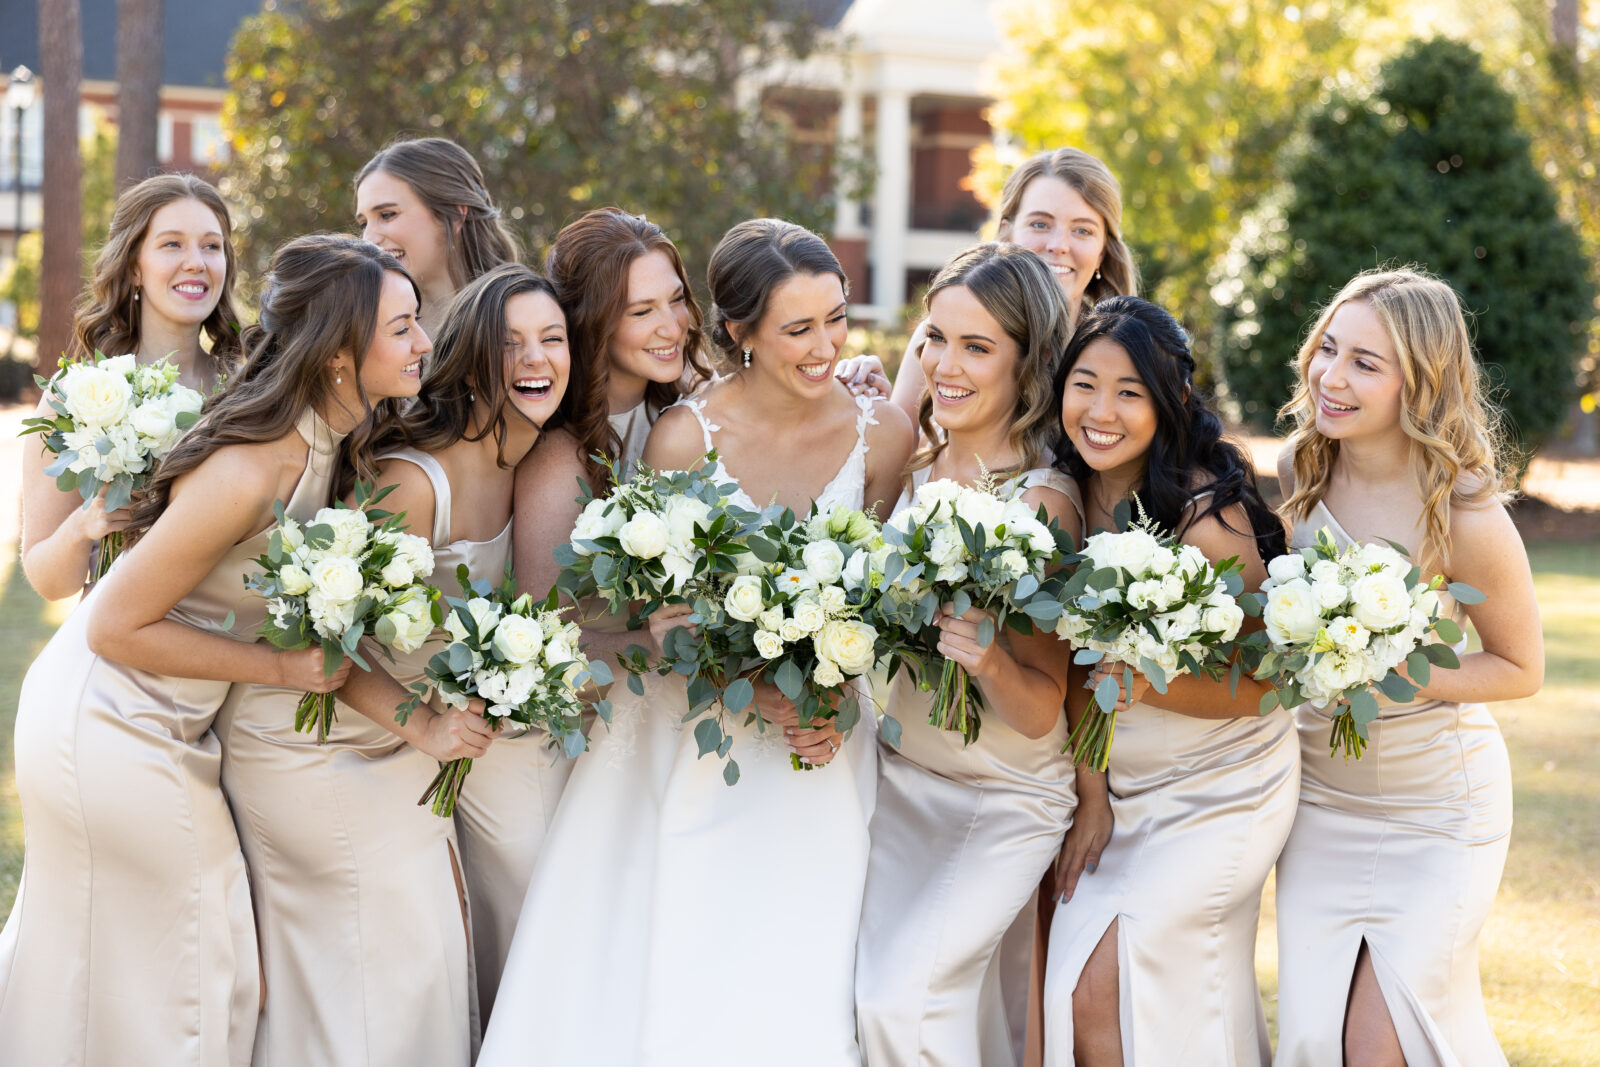 Bride in elegant white plunging v neck wedding dress walking with bridesmaids in champagne bridesmaid dresses 